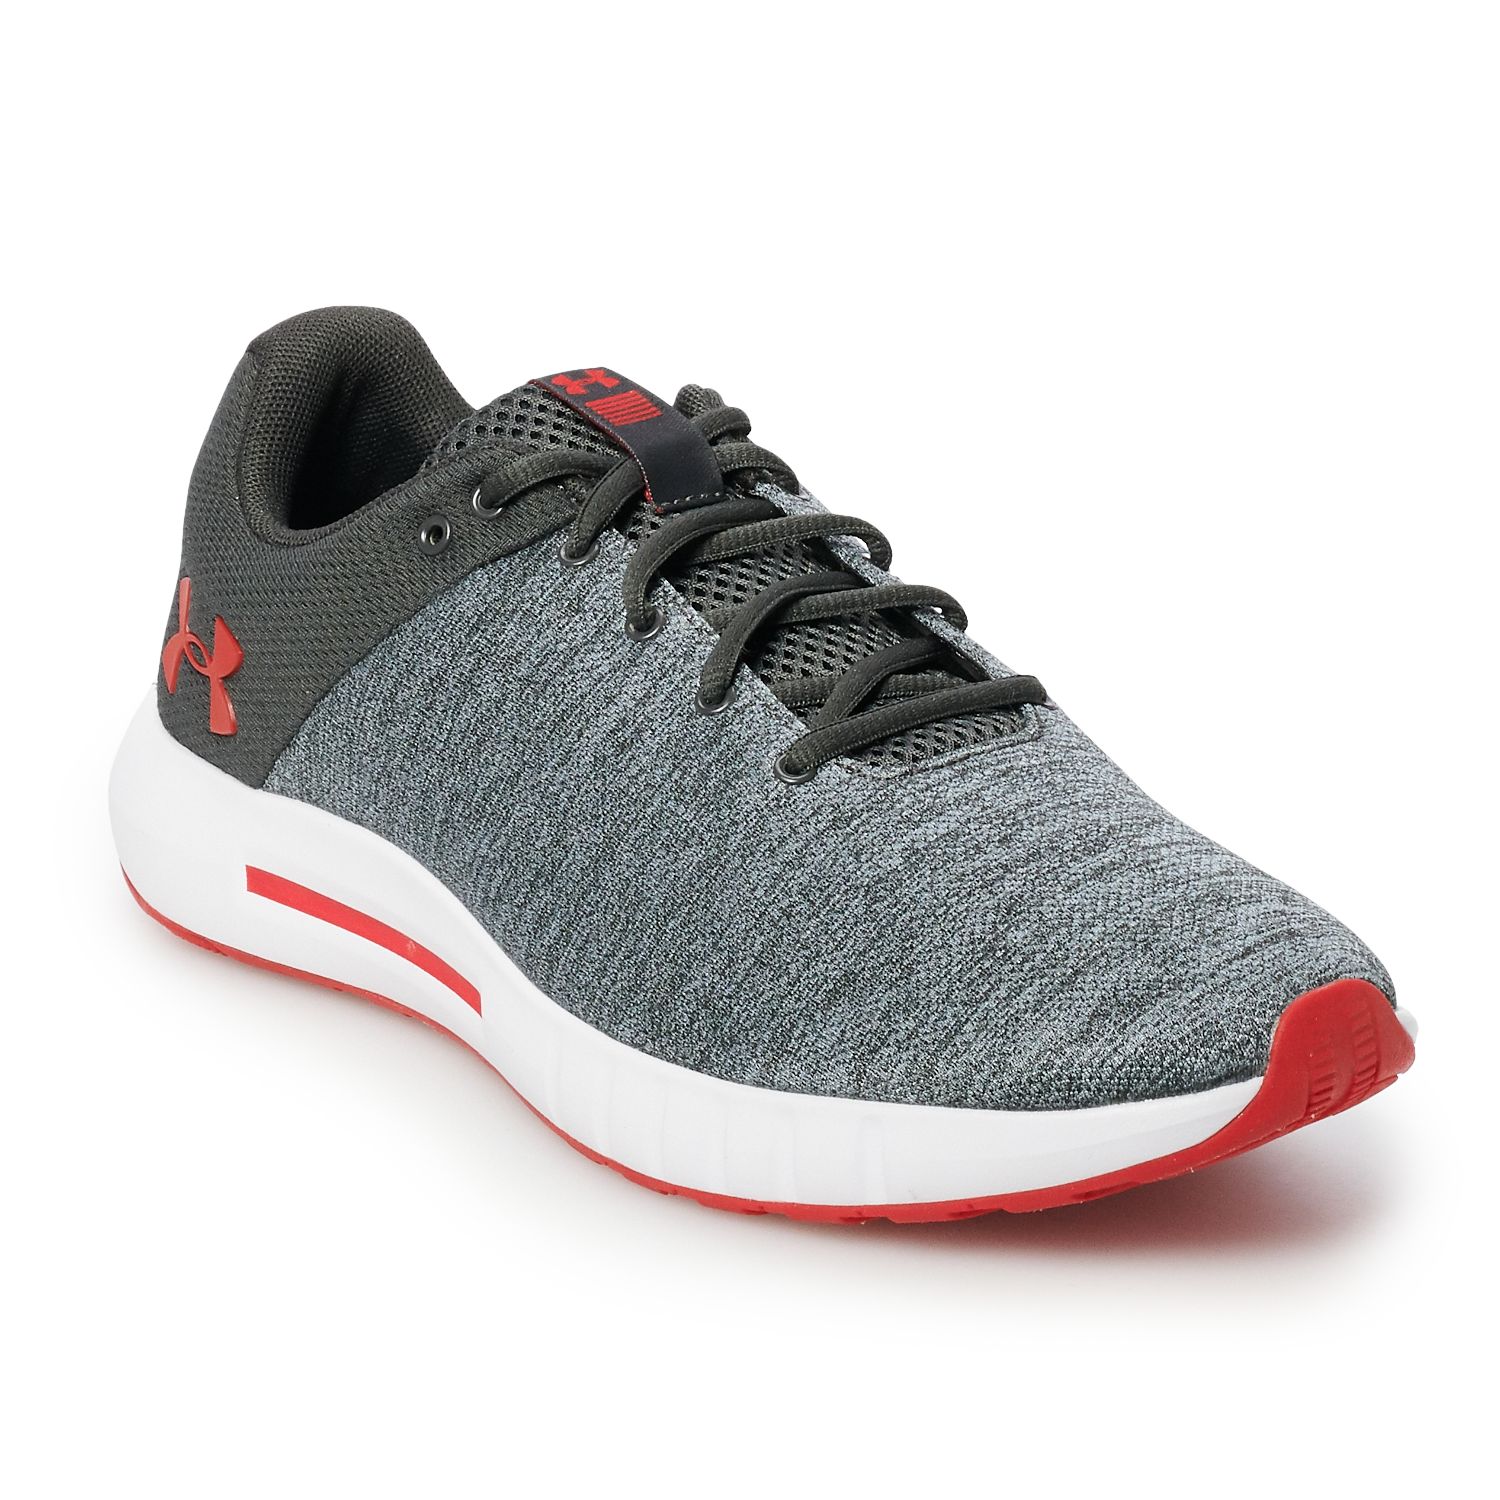 under armour micro g pursuit red